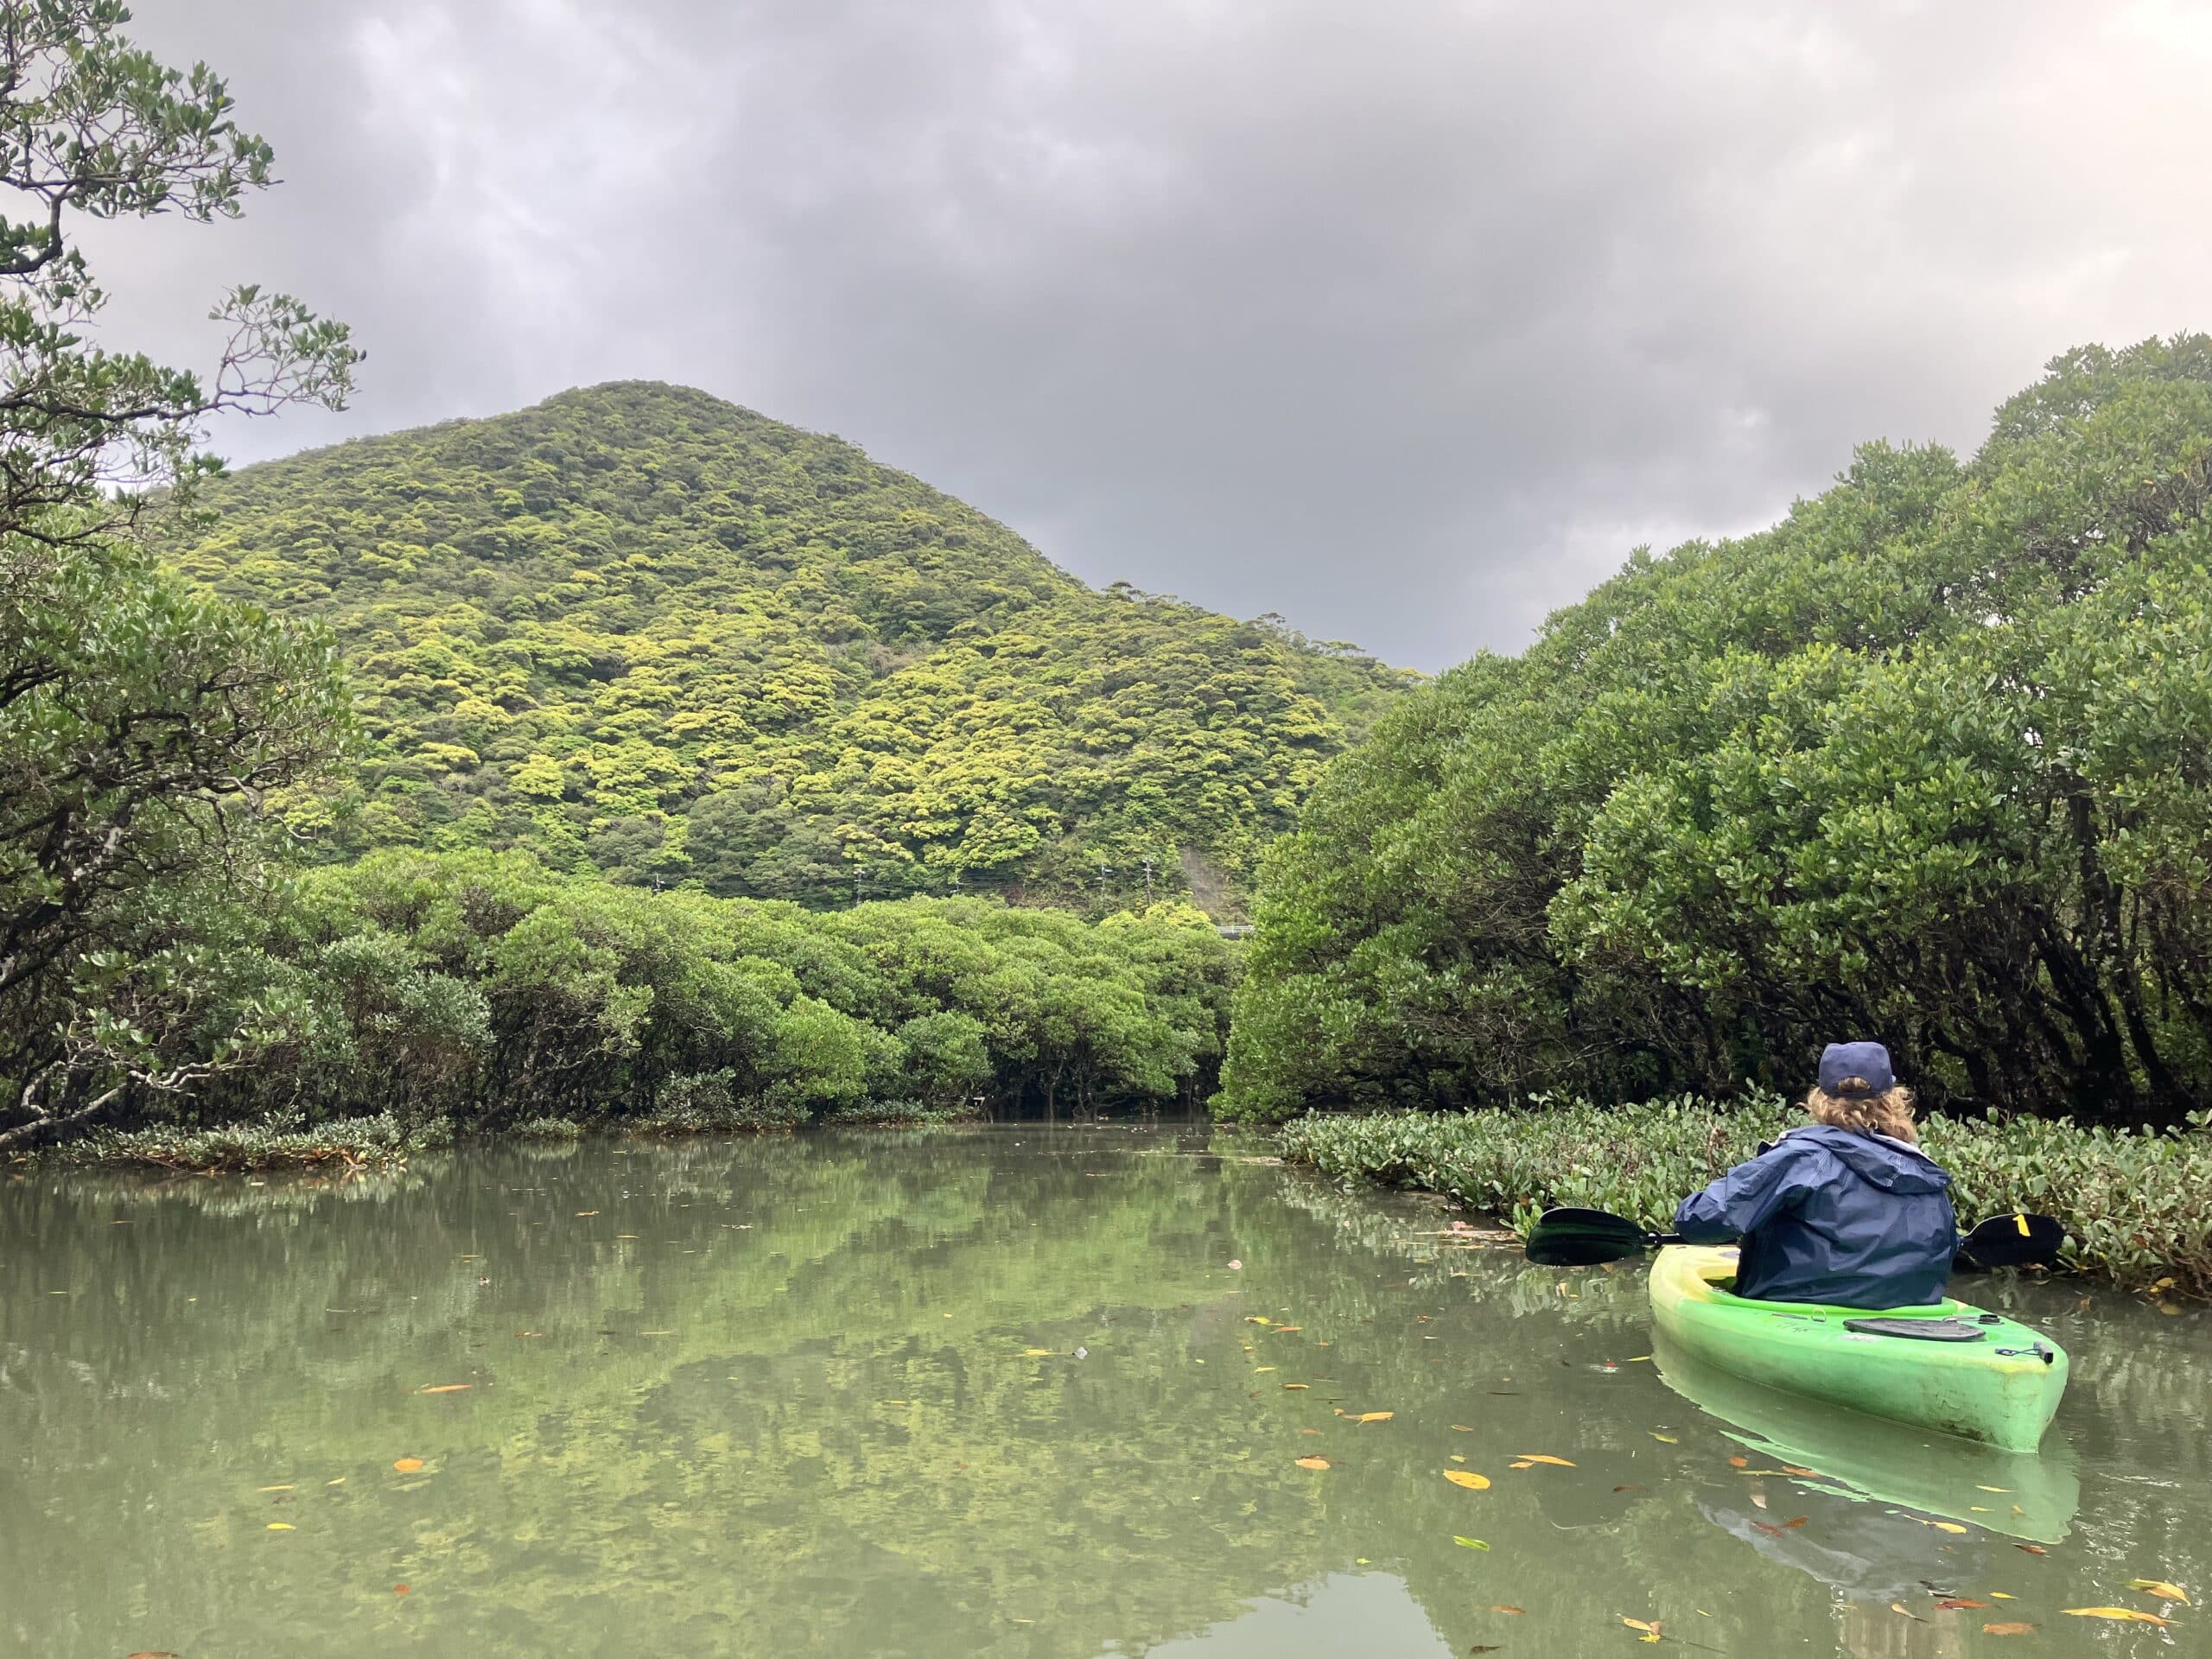 Paddling through the sparsely populated mangroves of Amami Oshima.